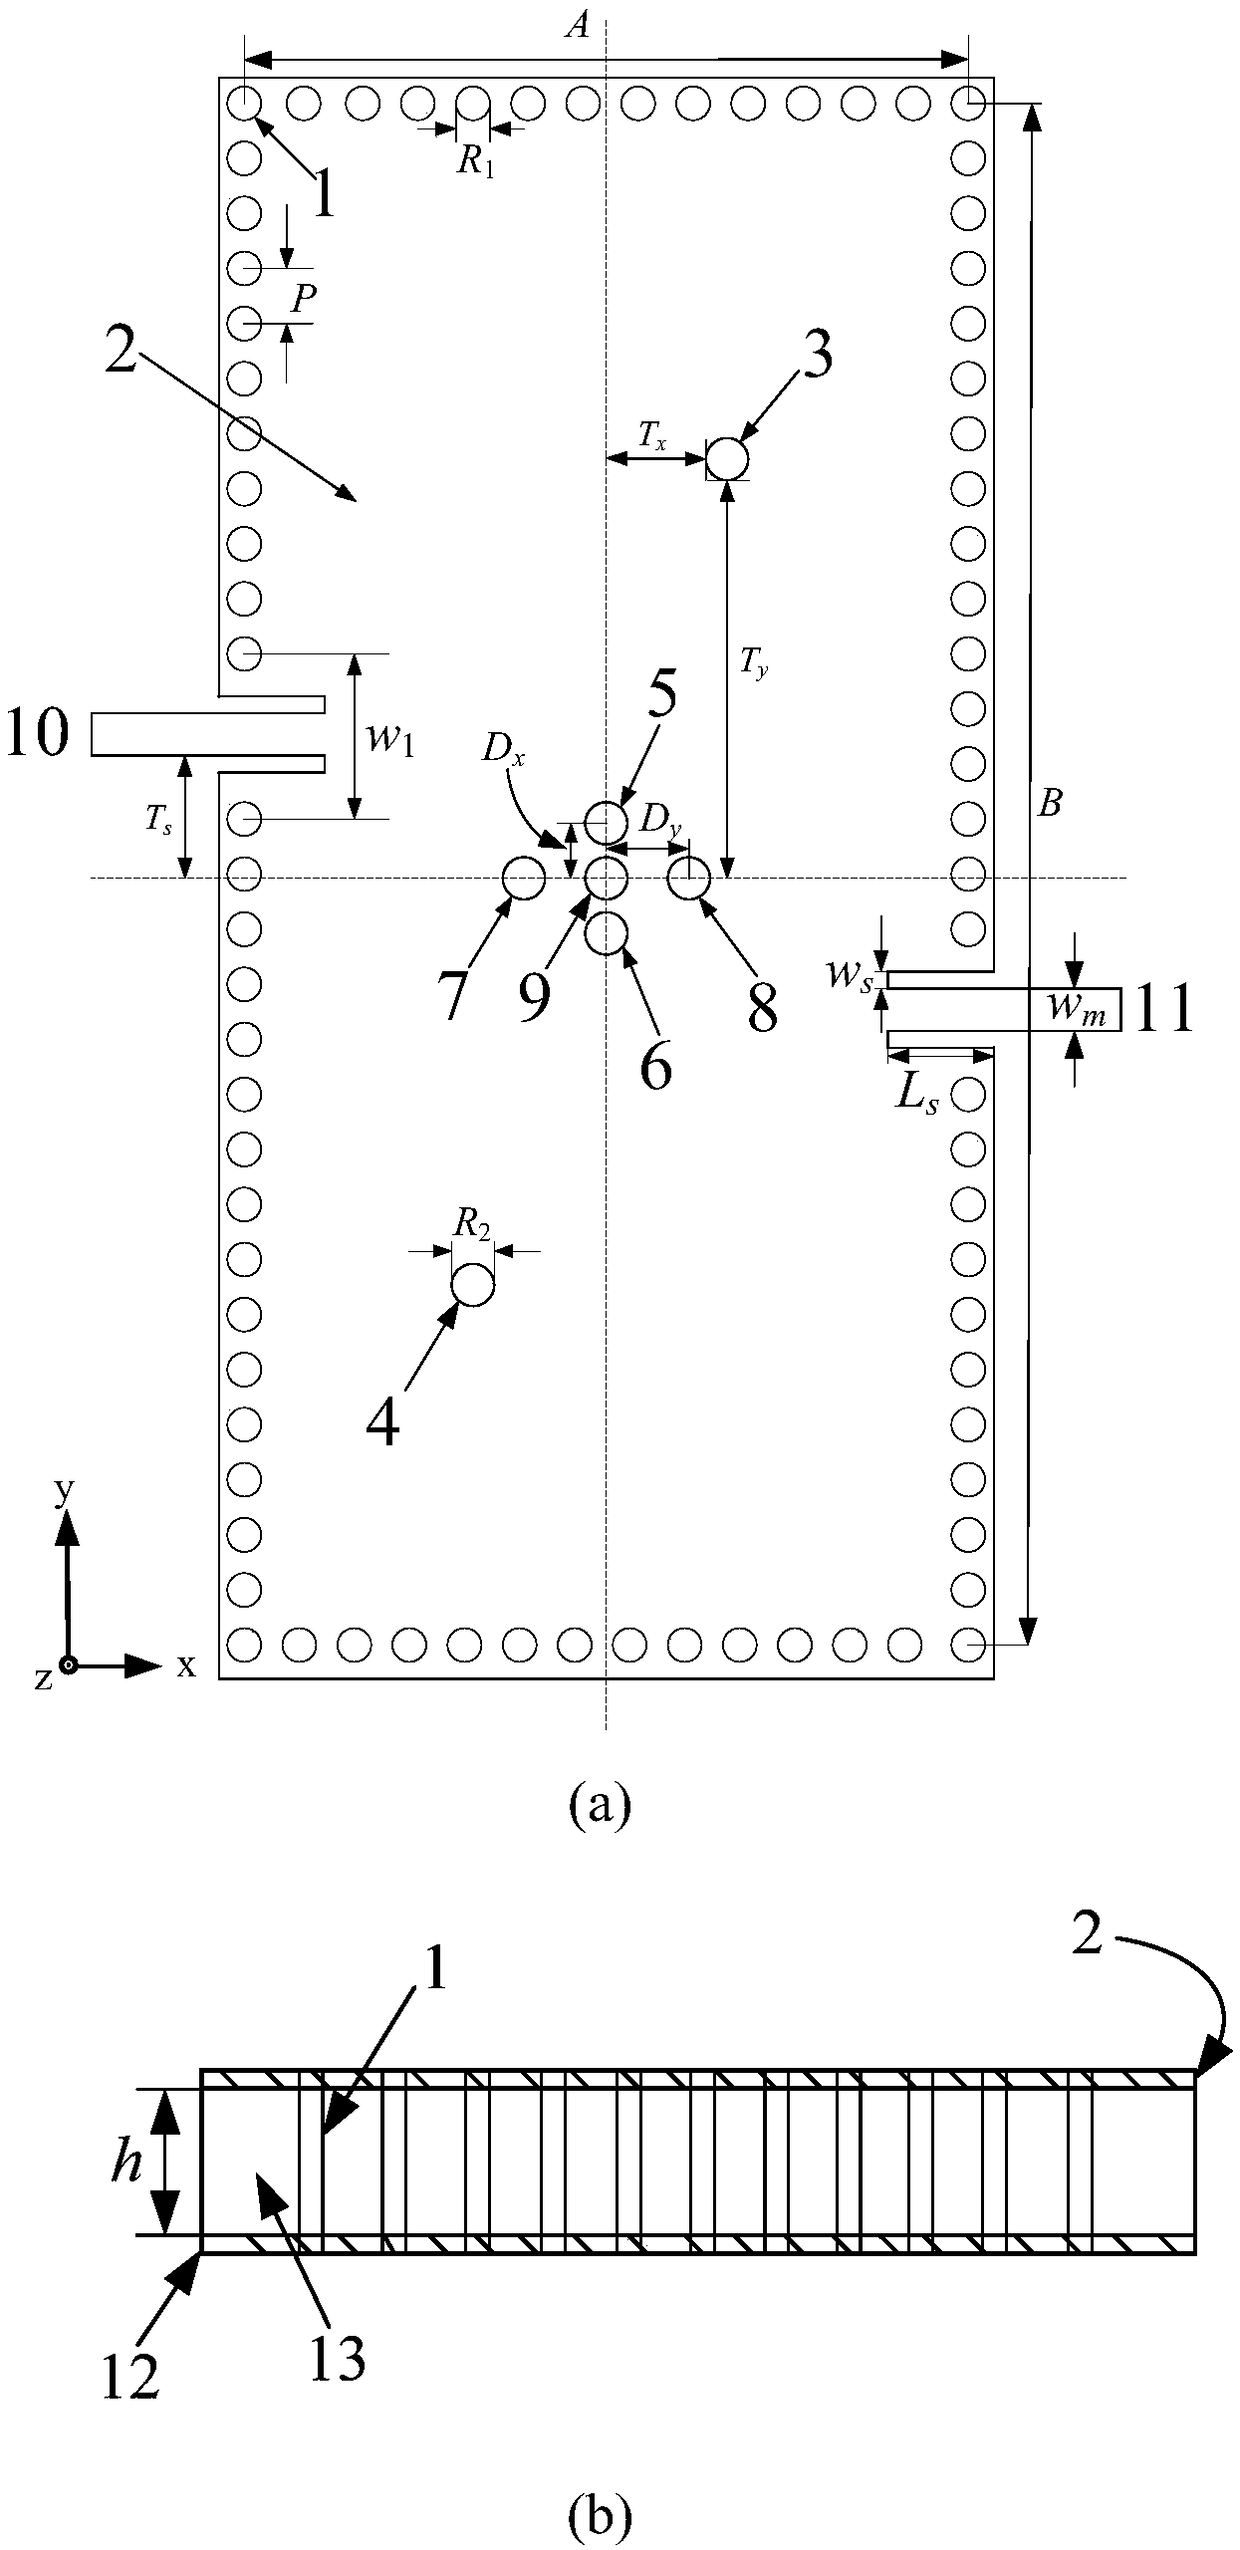 Four-mode dual-band filter based on a single rectangular SIW structure